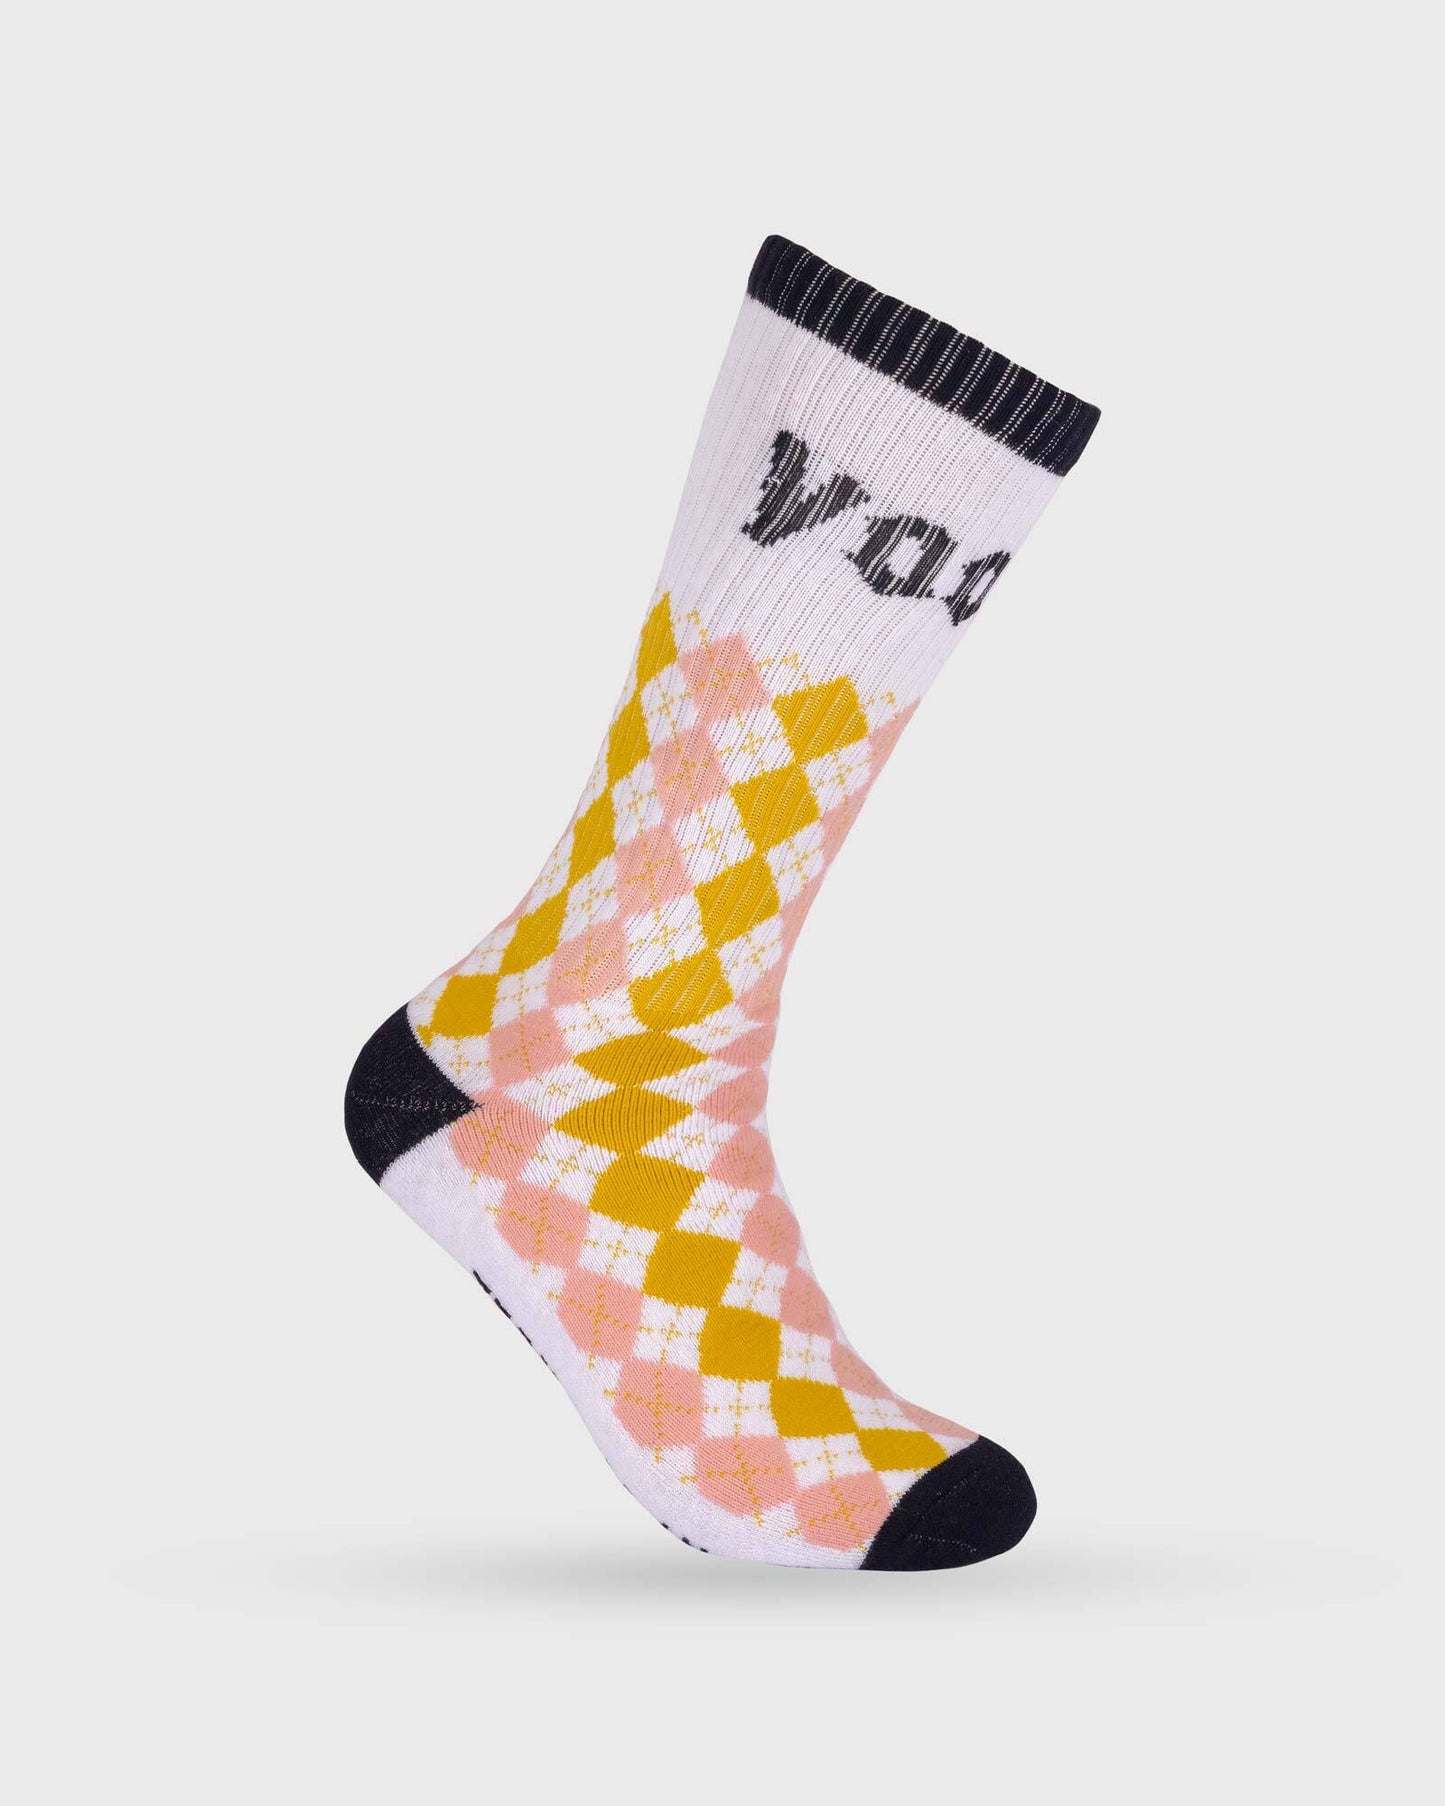 white voodoo socks with gold, pink and black graphics